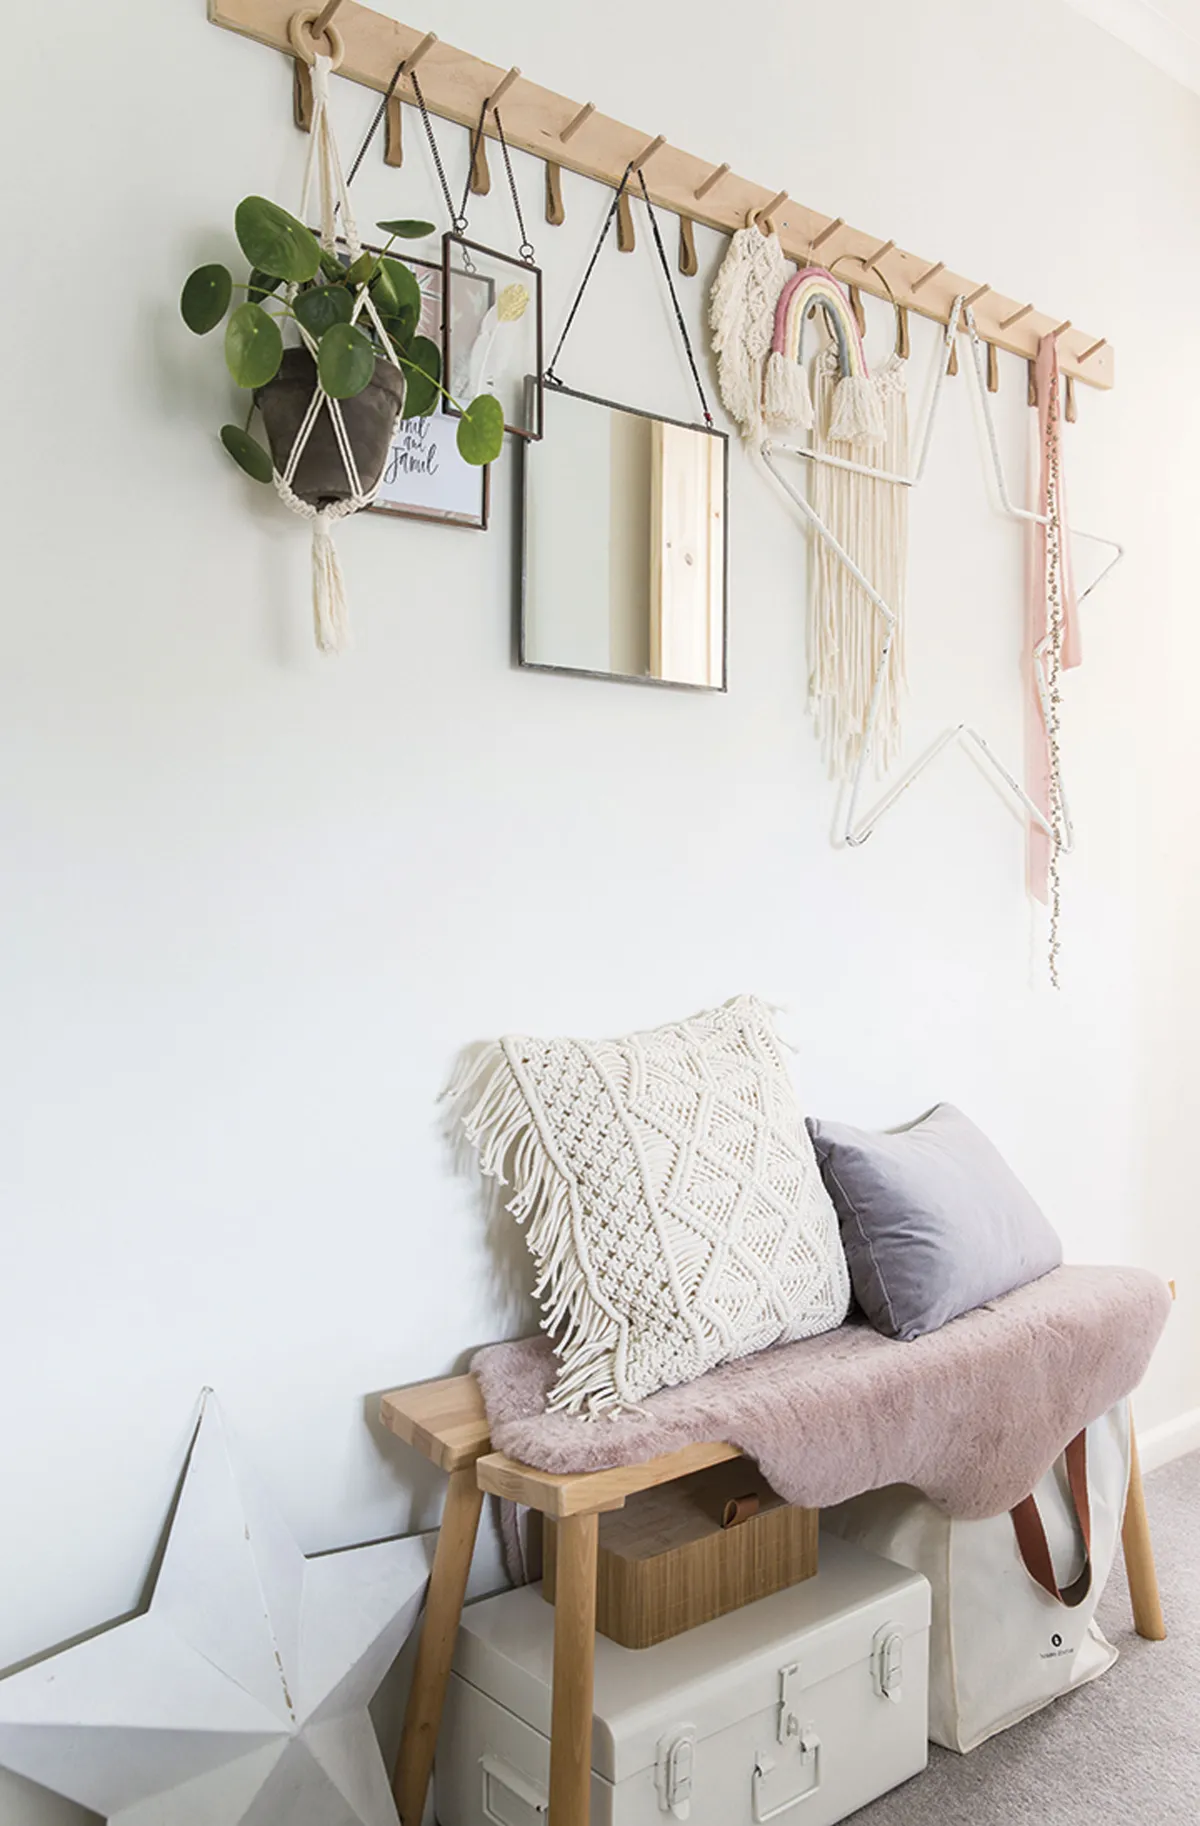 Style advice - make your own peg rail to hang pictures, clothes and decorative accessories